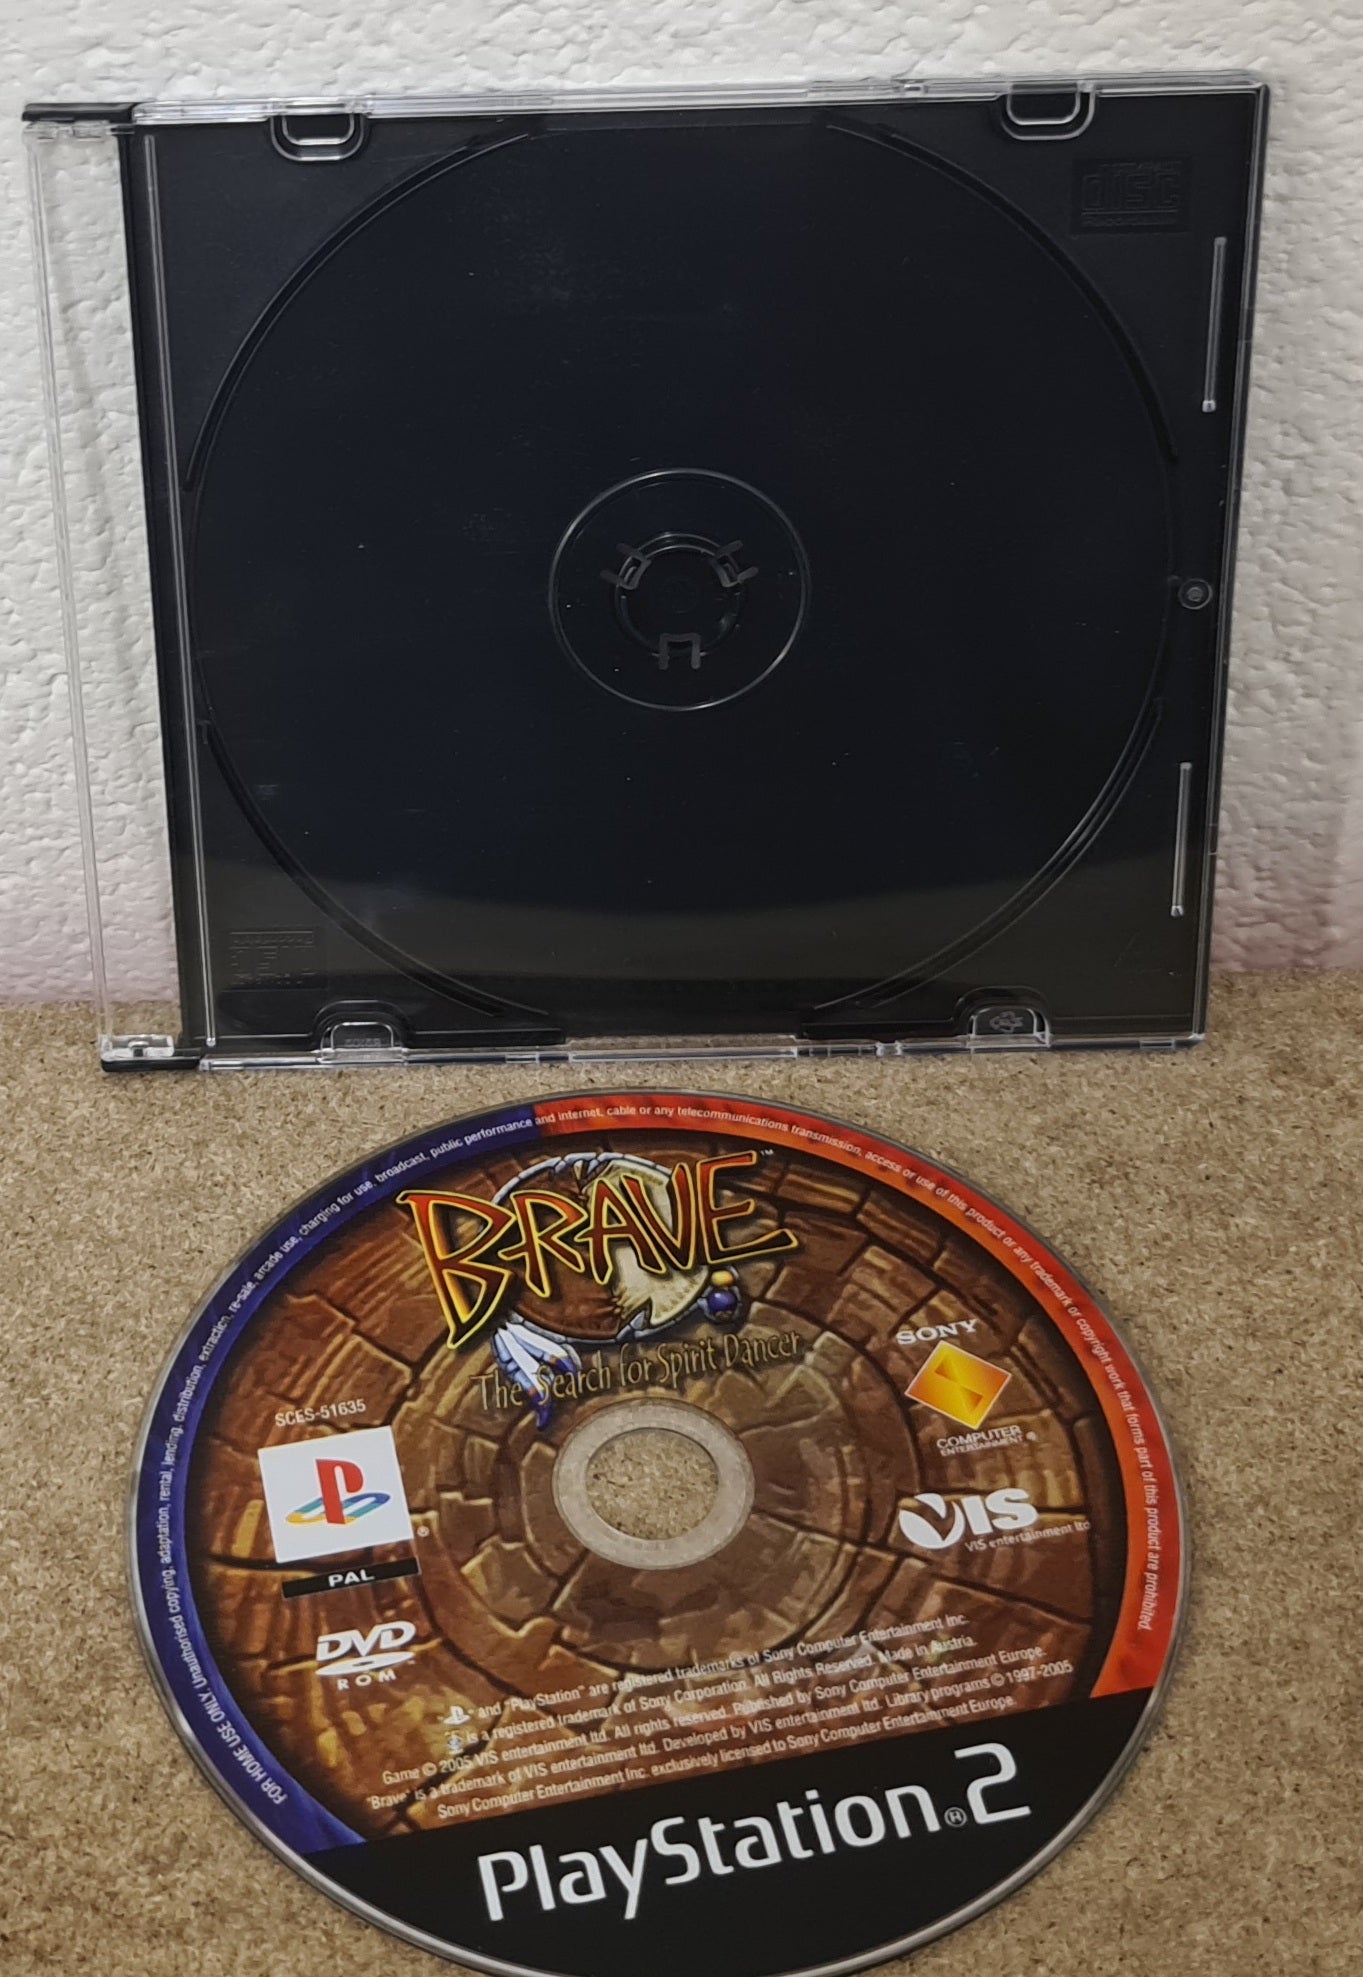 Brave the Search for Spirit Dancer Sony Playstation 2 (PS2) Game Disc –  Retro Gamer Heaven